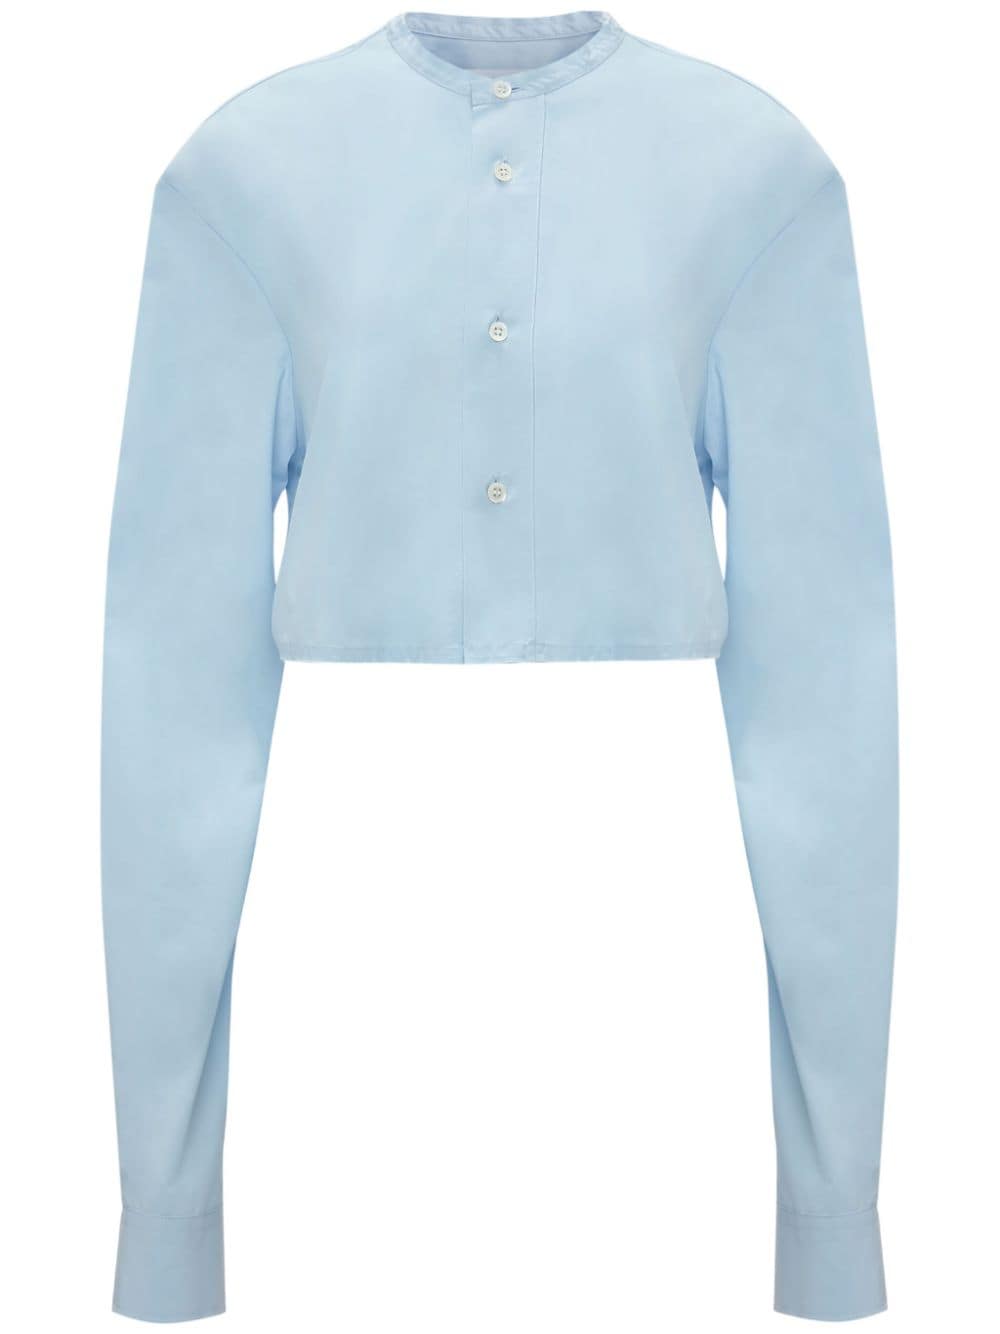 JW Anderson round-neck cropped shirt - Blue